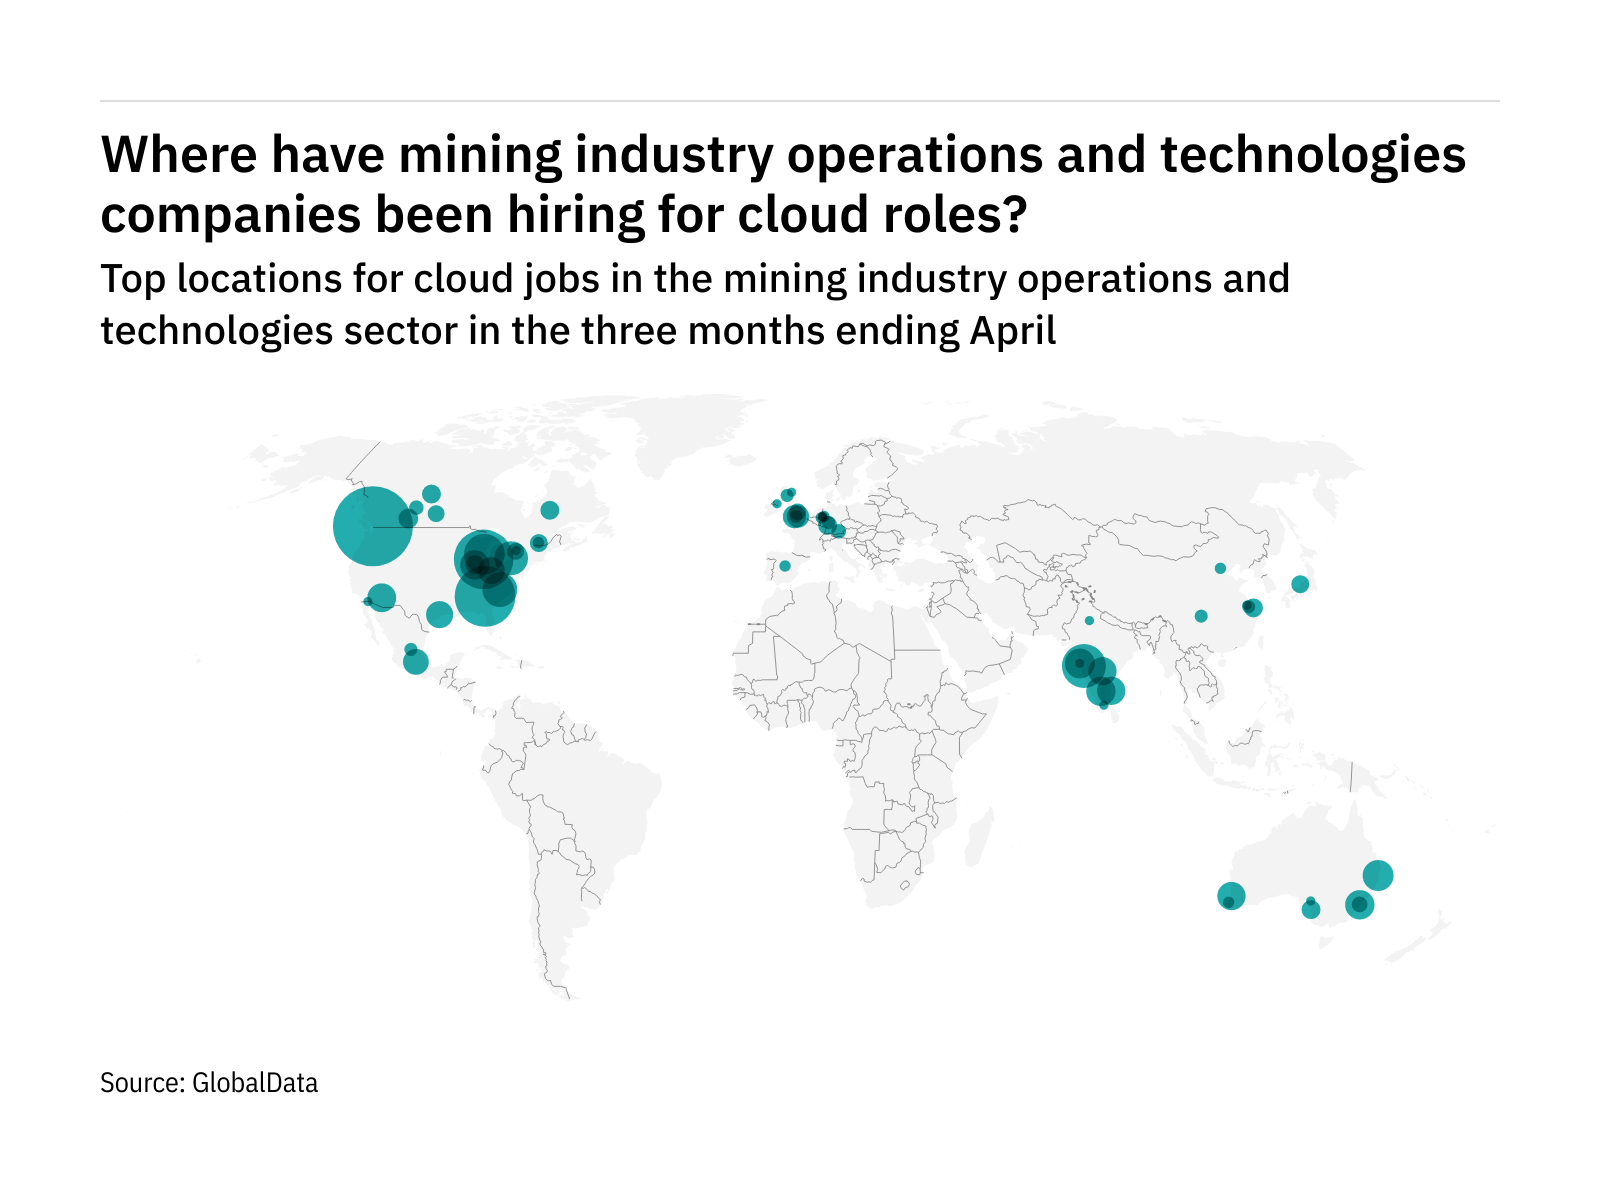 North America is seeing a hiring boom in mining industry cloud roles